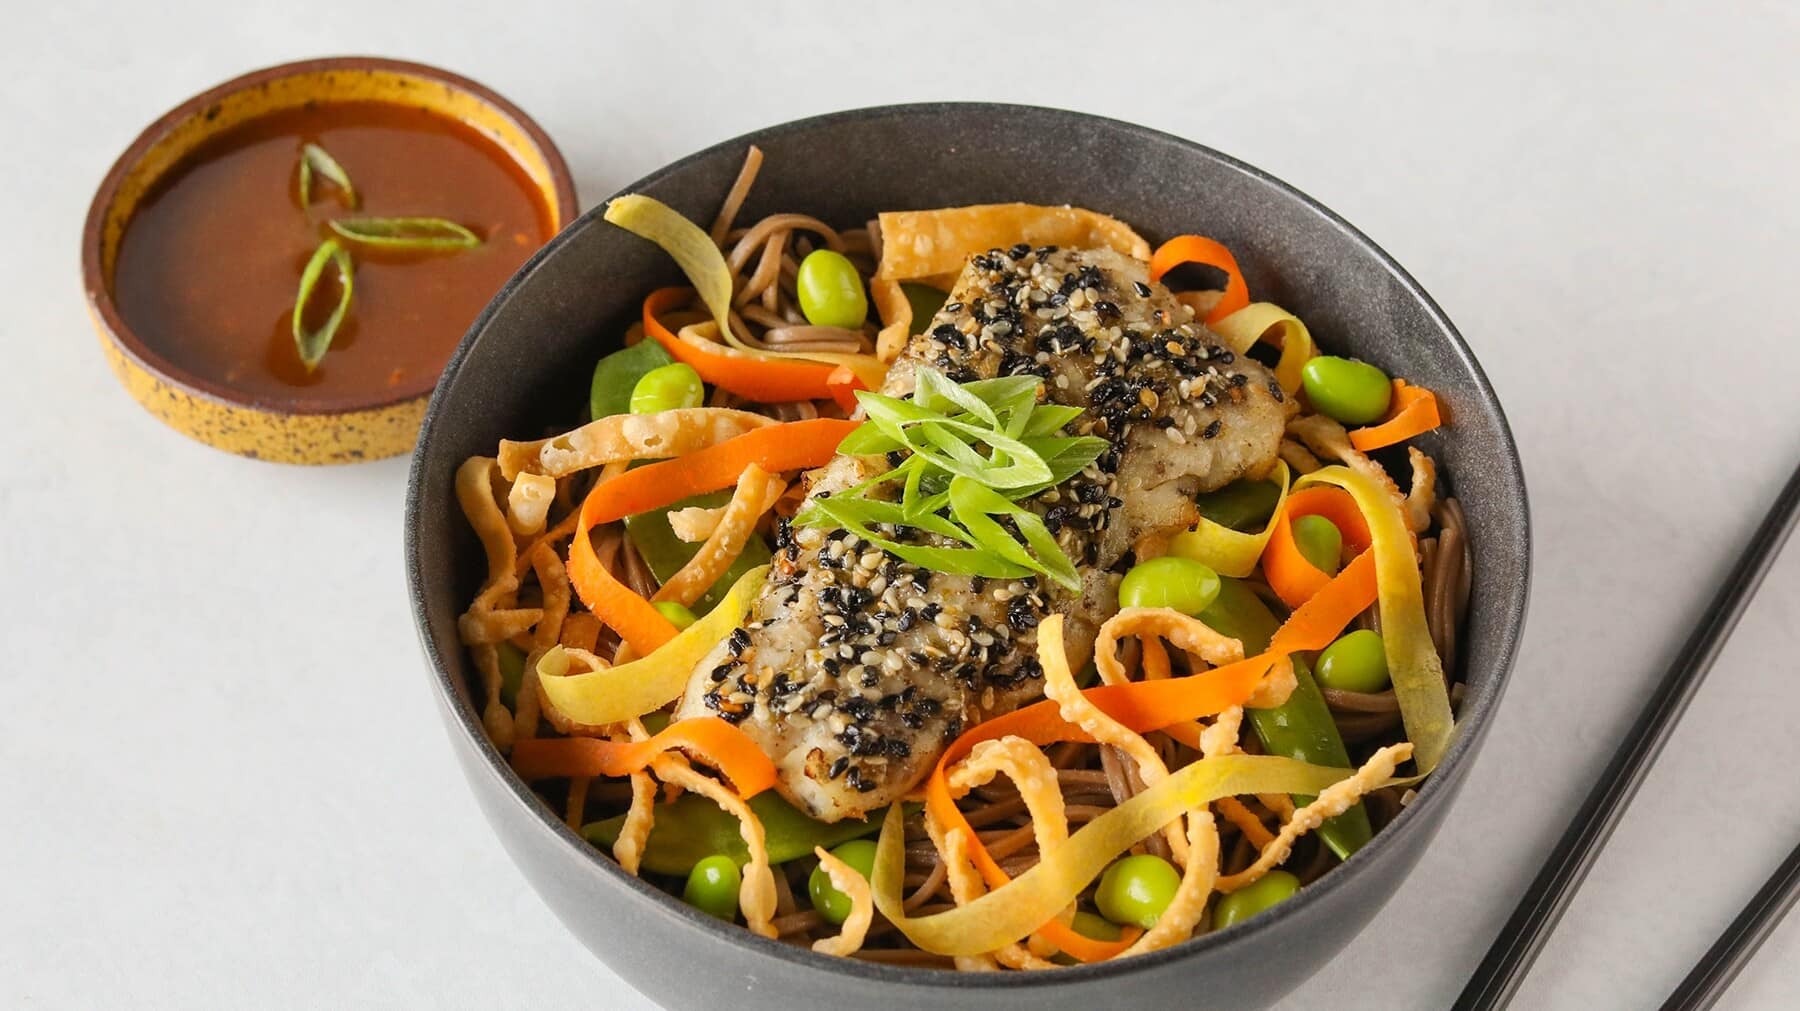 Try this Japanese soba noodle salad recipe